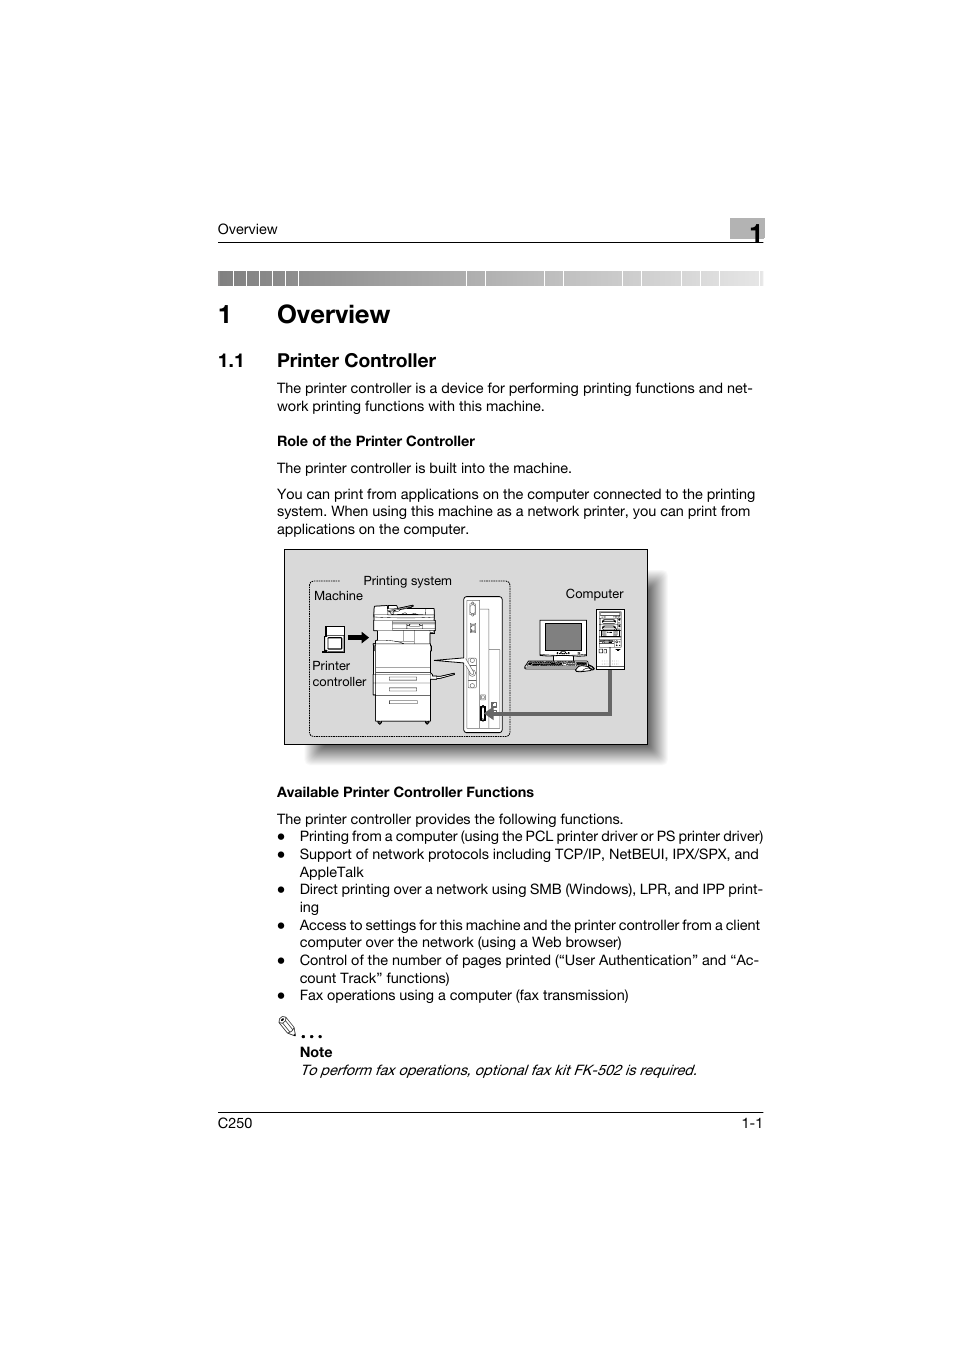 1 overview, 1 printer controller, Role of the printer controller | Available printer controller functions, Overview, Printer controller -1, 1overview | Konica Minolta bizhub C250 User Manual | Page 14 / 96